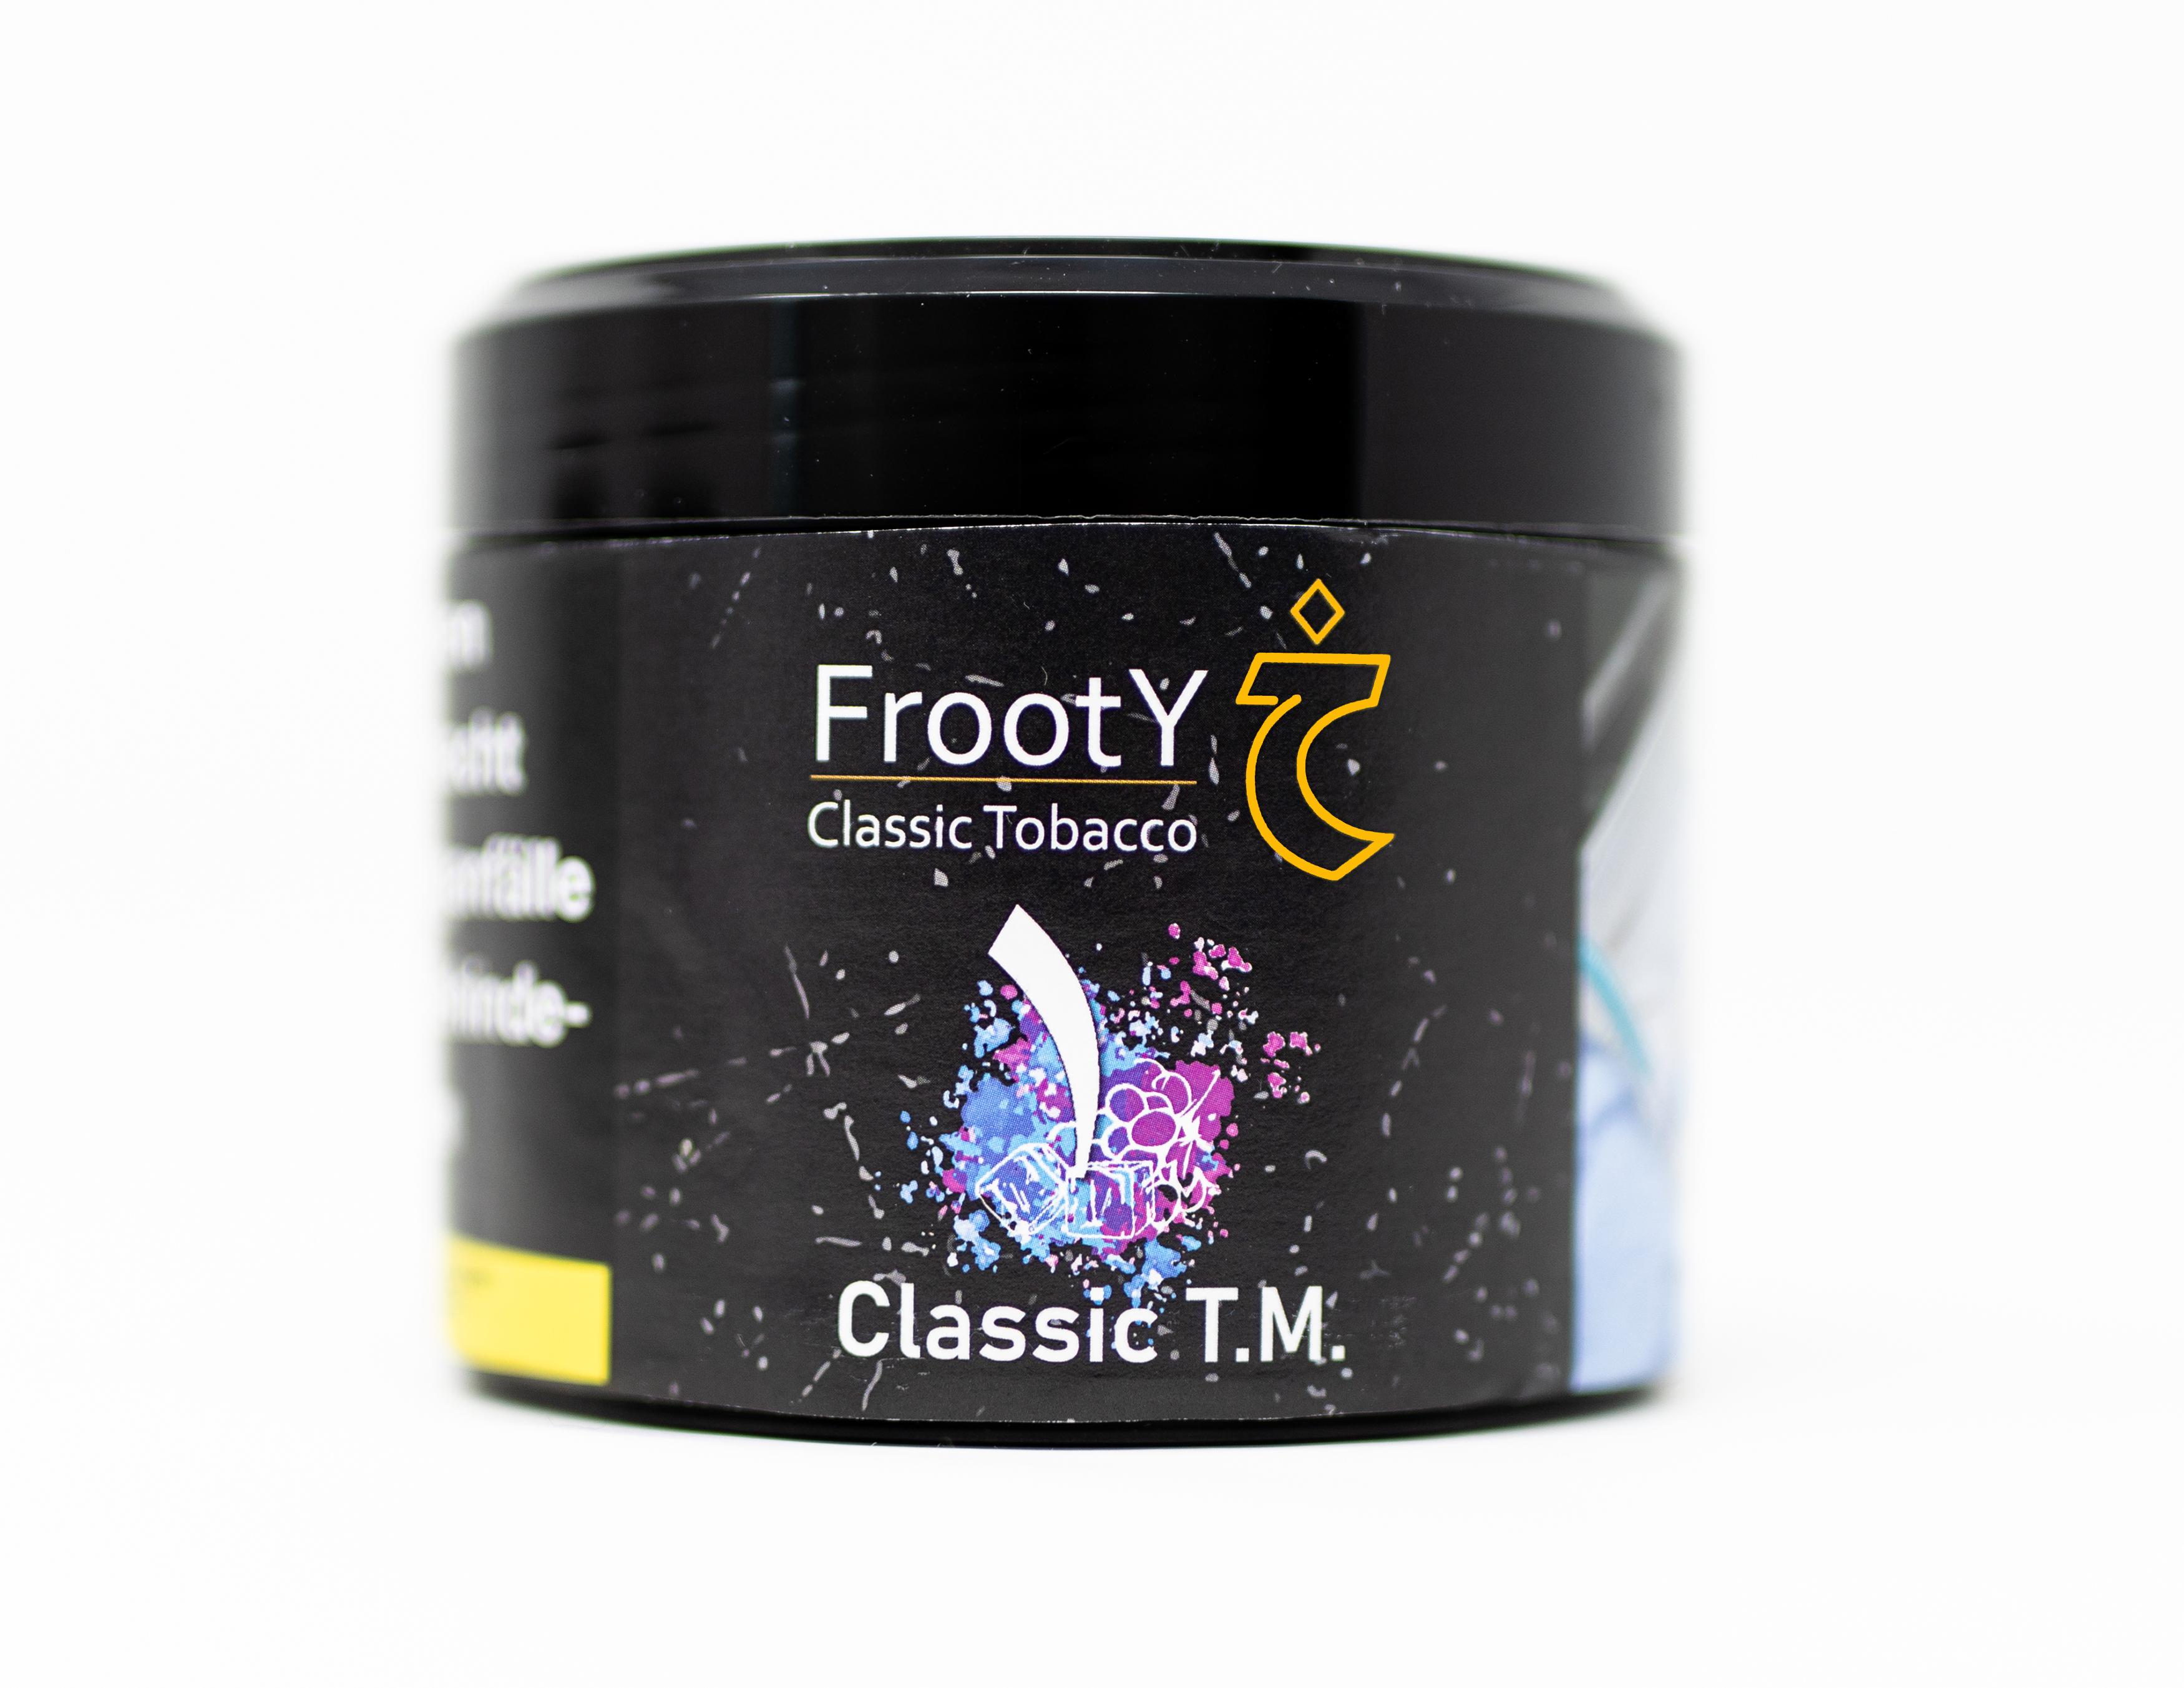 FrootY Classic Tobacco " 1 Classic T.M." 200g